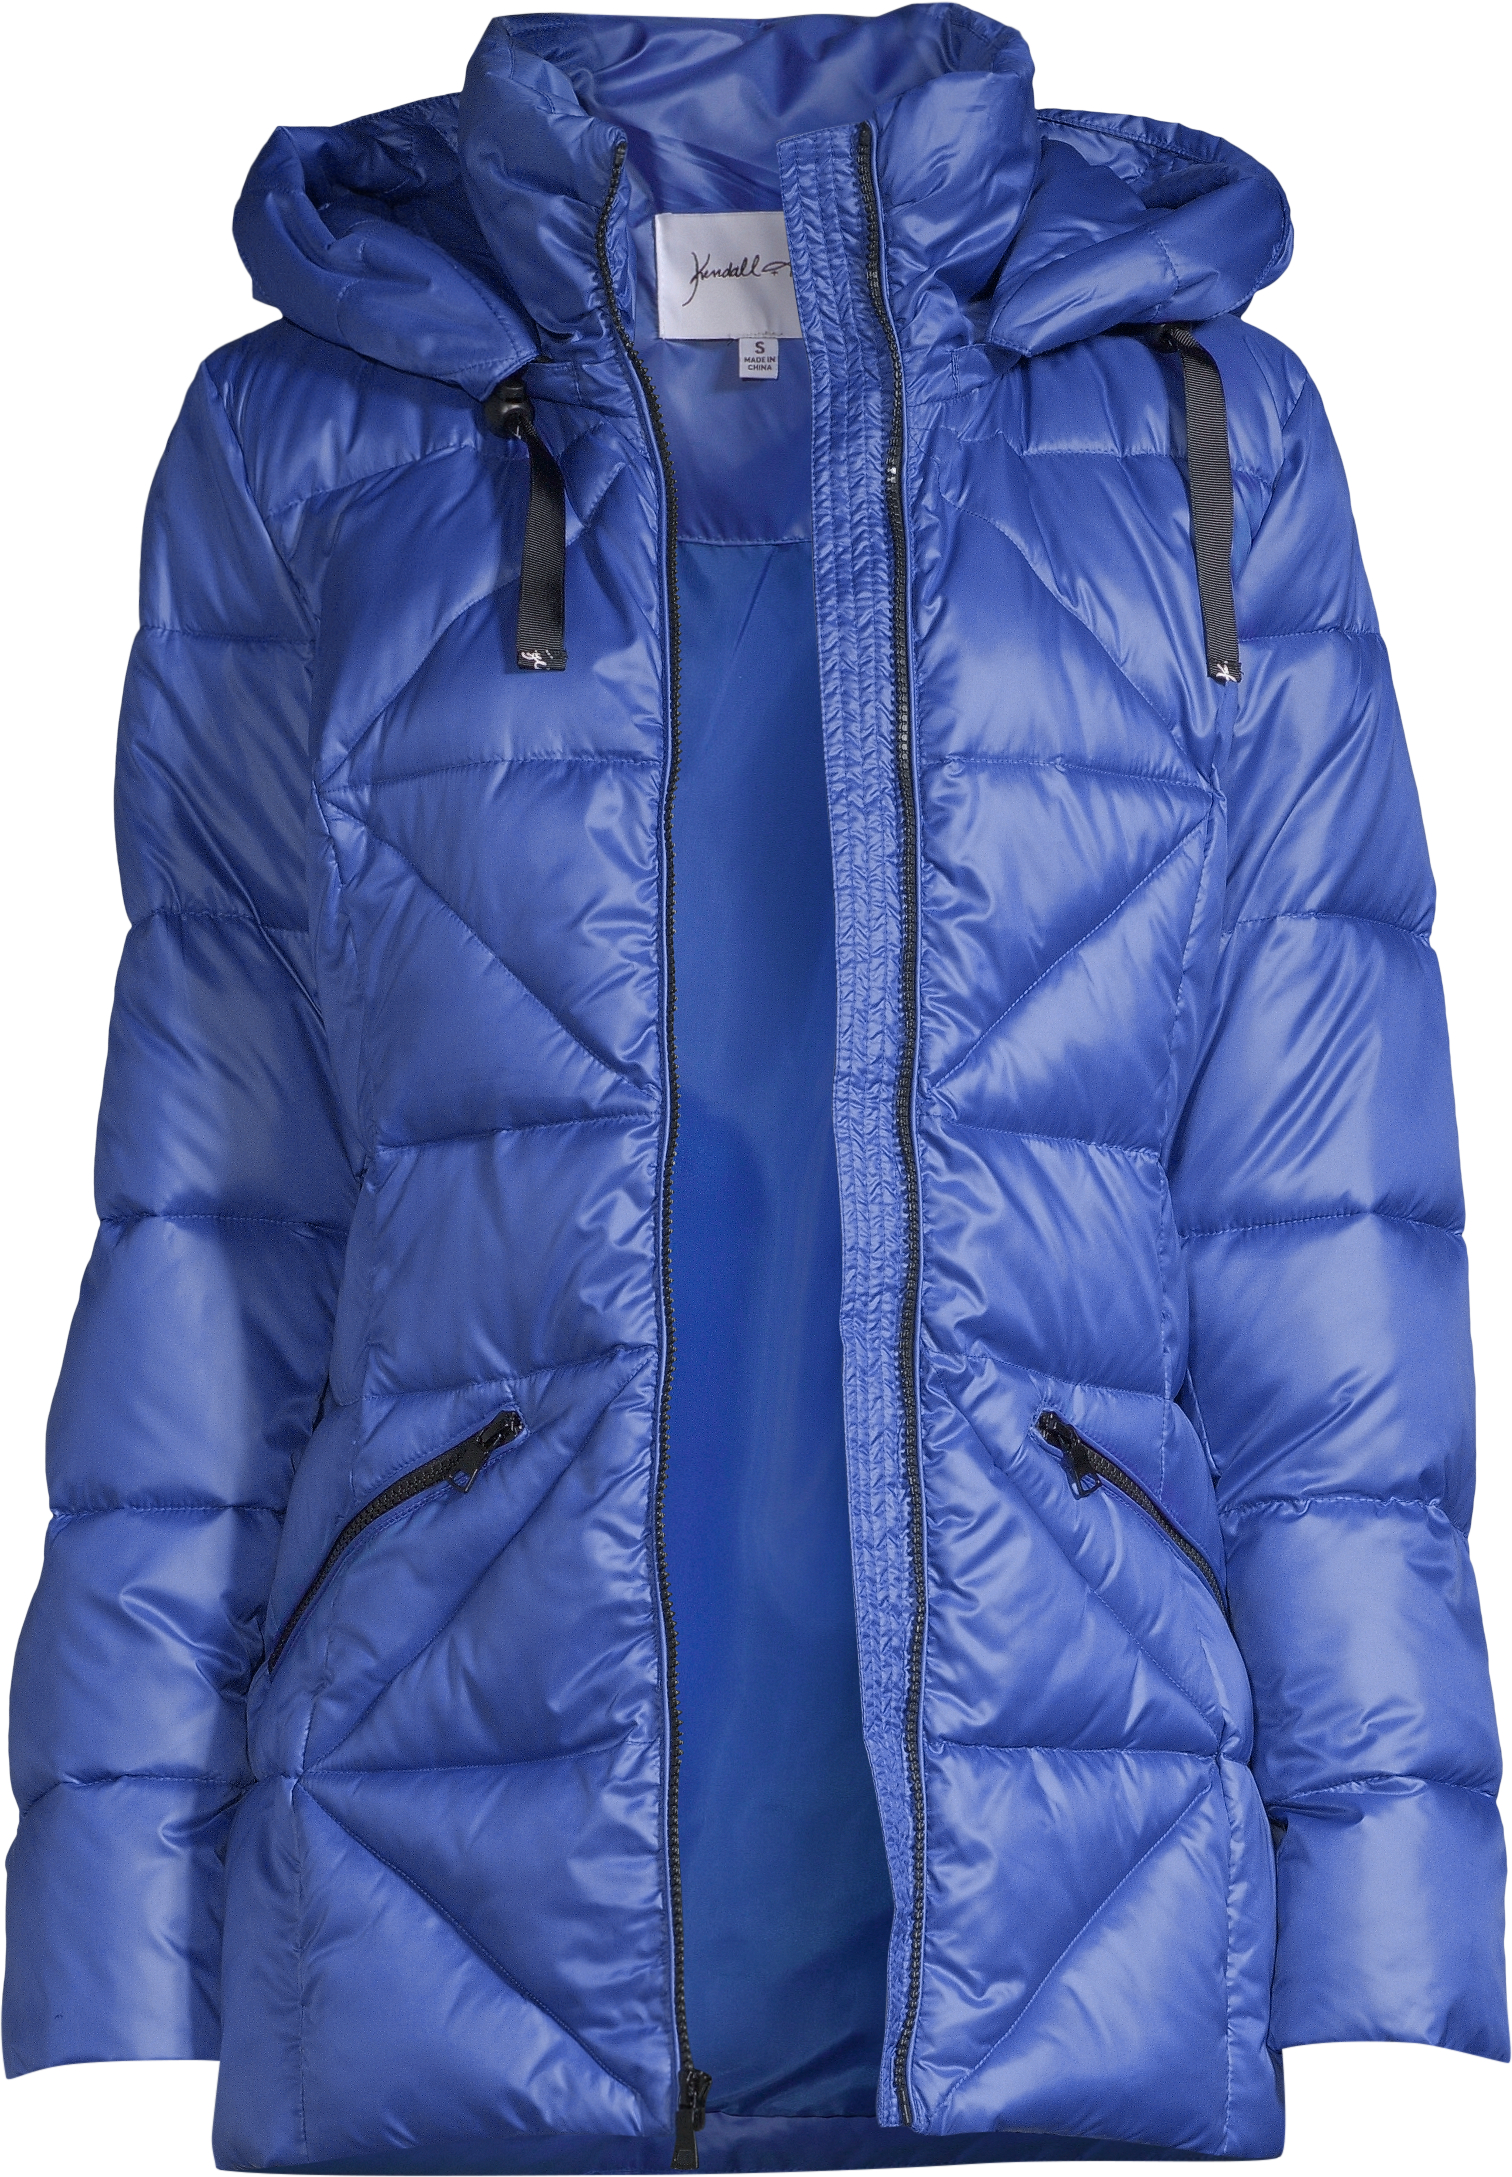 Kendall + Kylie Women's Shiny Long Puffer with Bold Zipper Detail - image 6 of 6